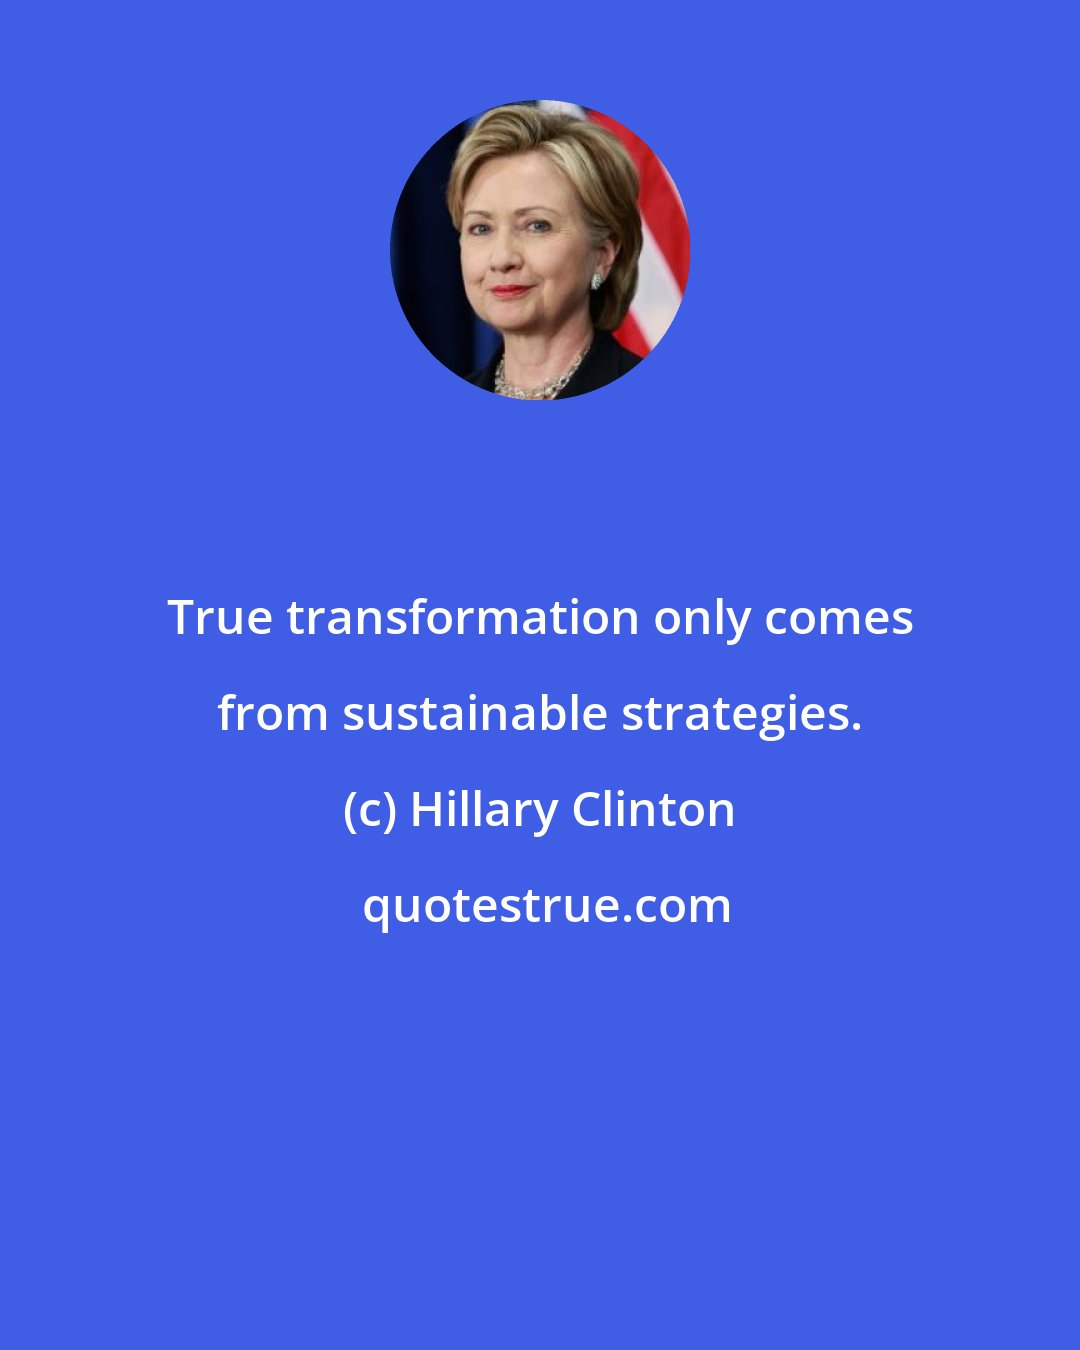 Hillary Clinton: True transformation only comes from sustainable strategies.